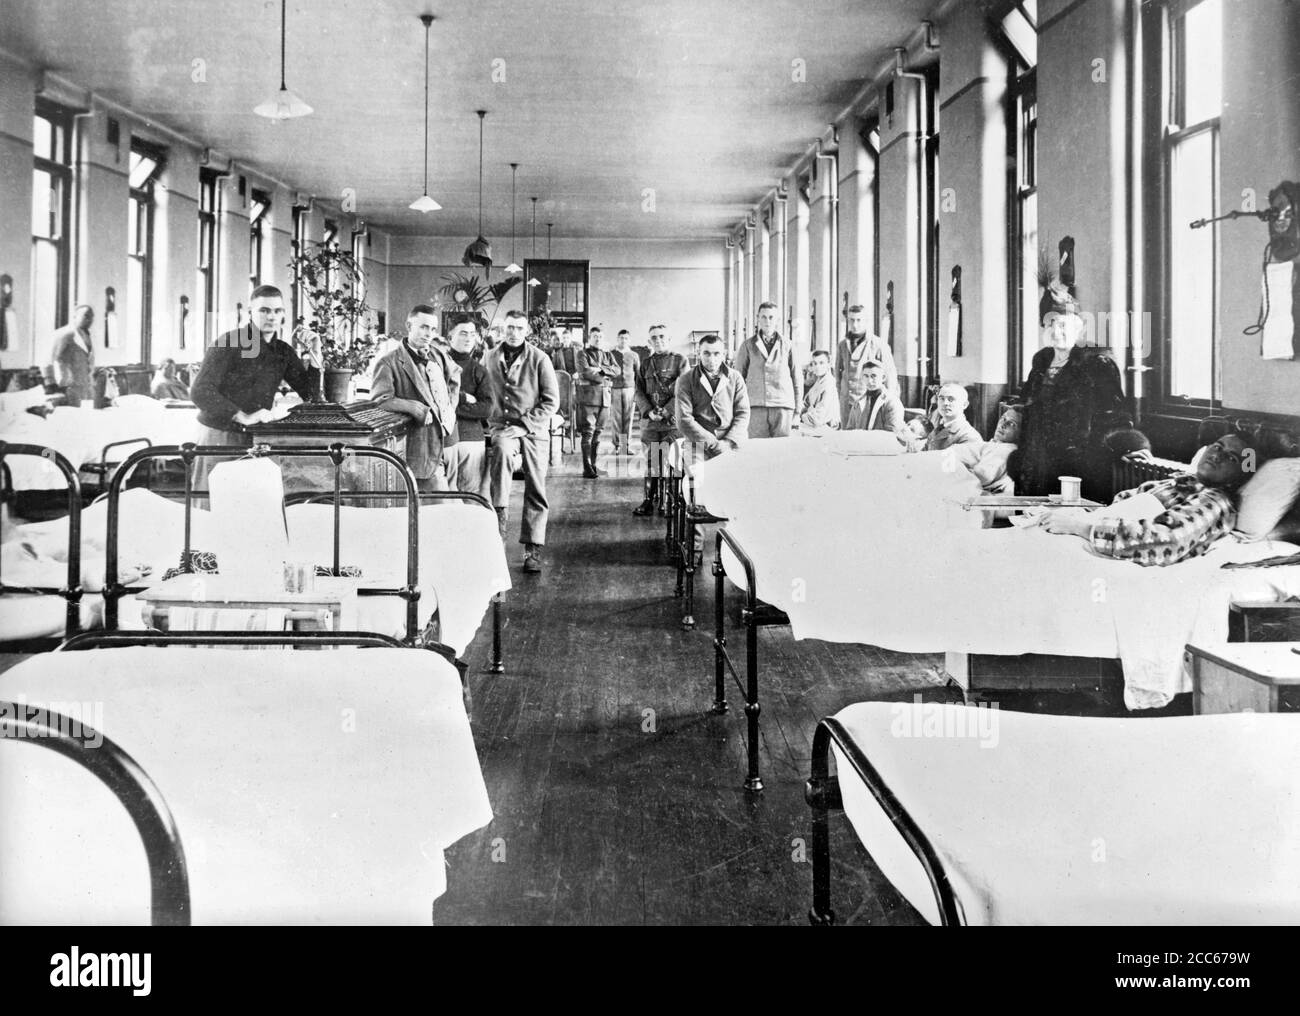 Spanish Flu 1918. American servicemen in an influenza ward at the Fourth Scottish General Hospital in Glasgow during the Spanish Flu pandemic of 1918. Photograph taken in November 1918 Stock Photo